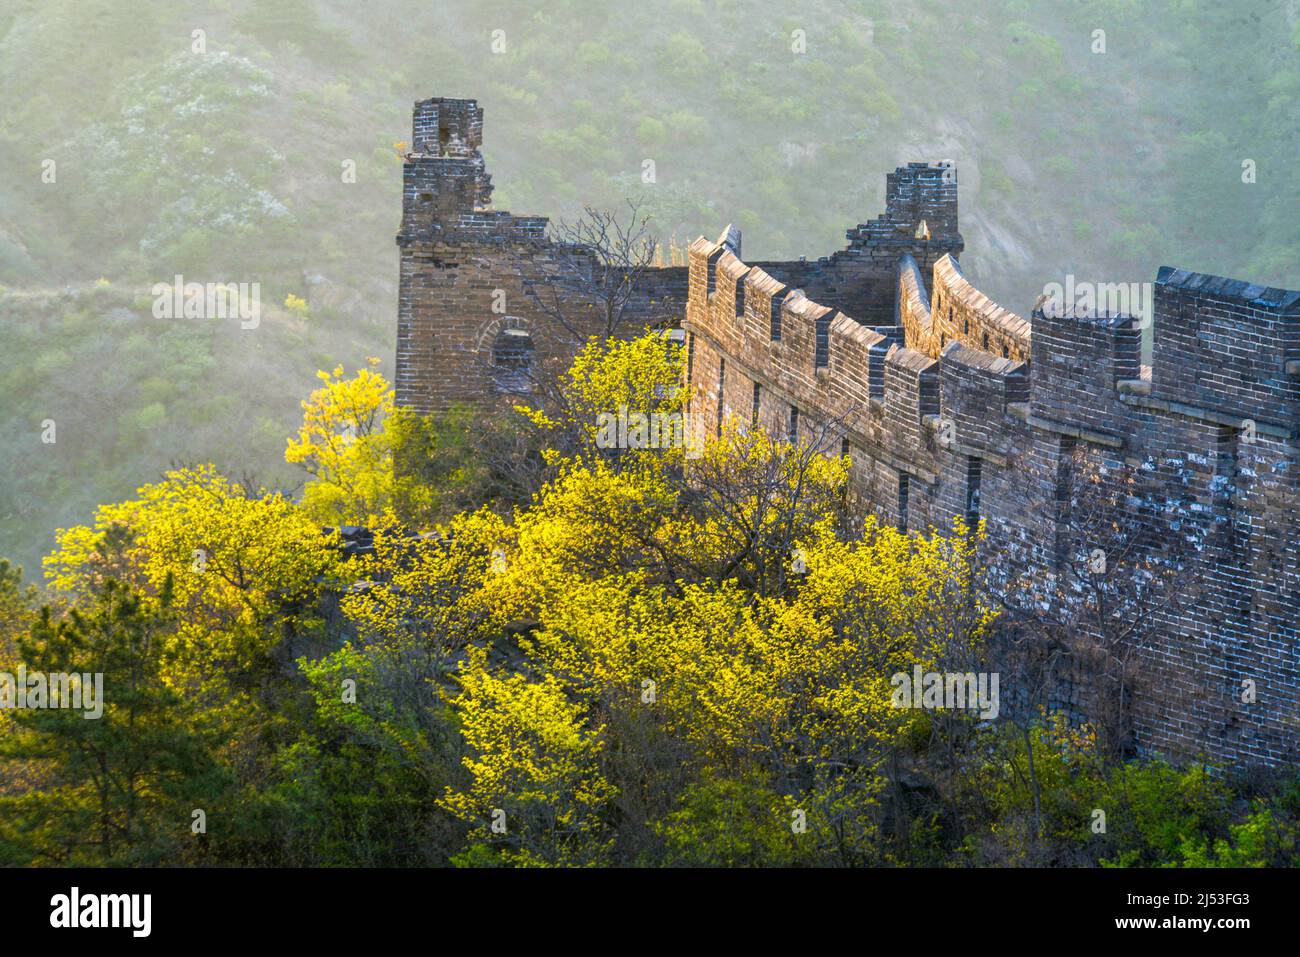 CHENGDE, CHINA - APRIL 20, 2022 - A view of the Jinshanling Great Wall Scenic Area in Chengde City, Hebei Province, April 20, 2022. Stock Photo